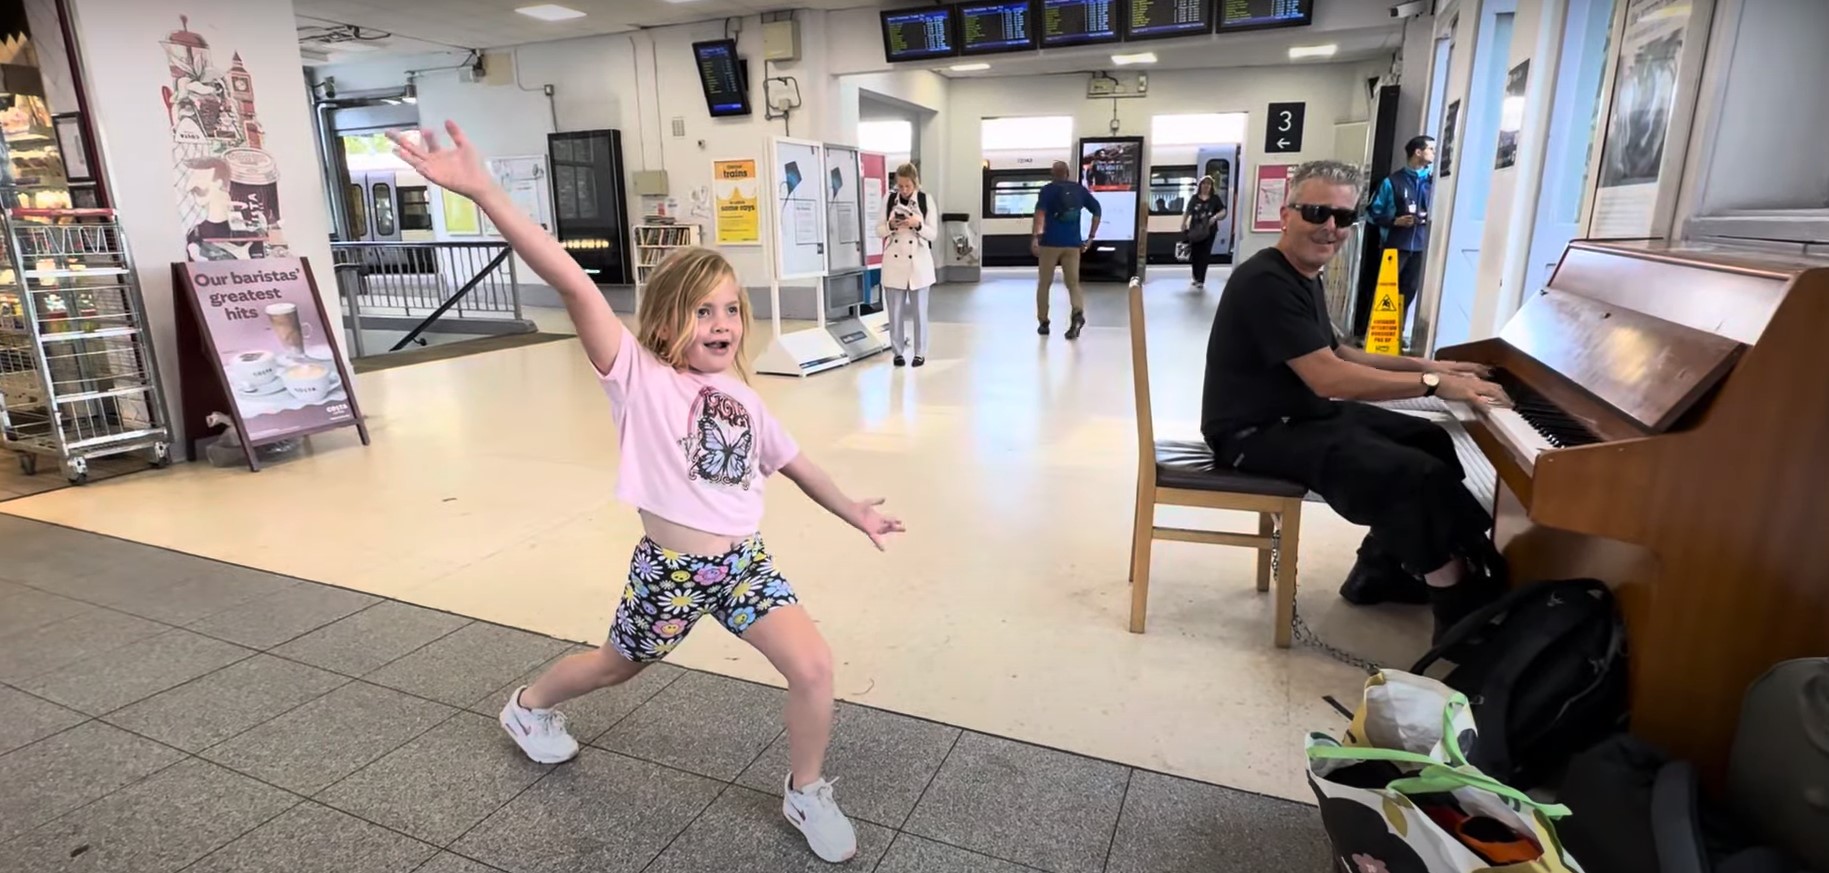 See What Happens When This 8-Year-Old Girl Hears Boogie-Woogie For The First Time